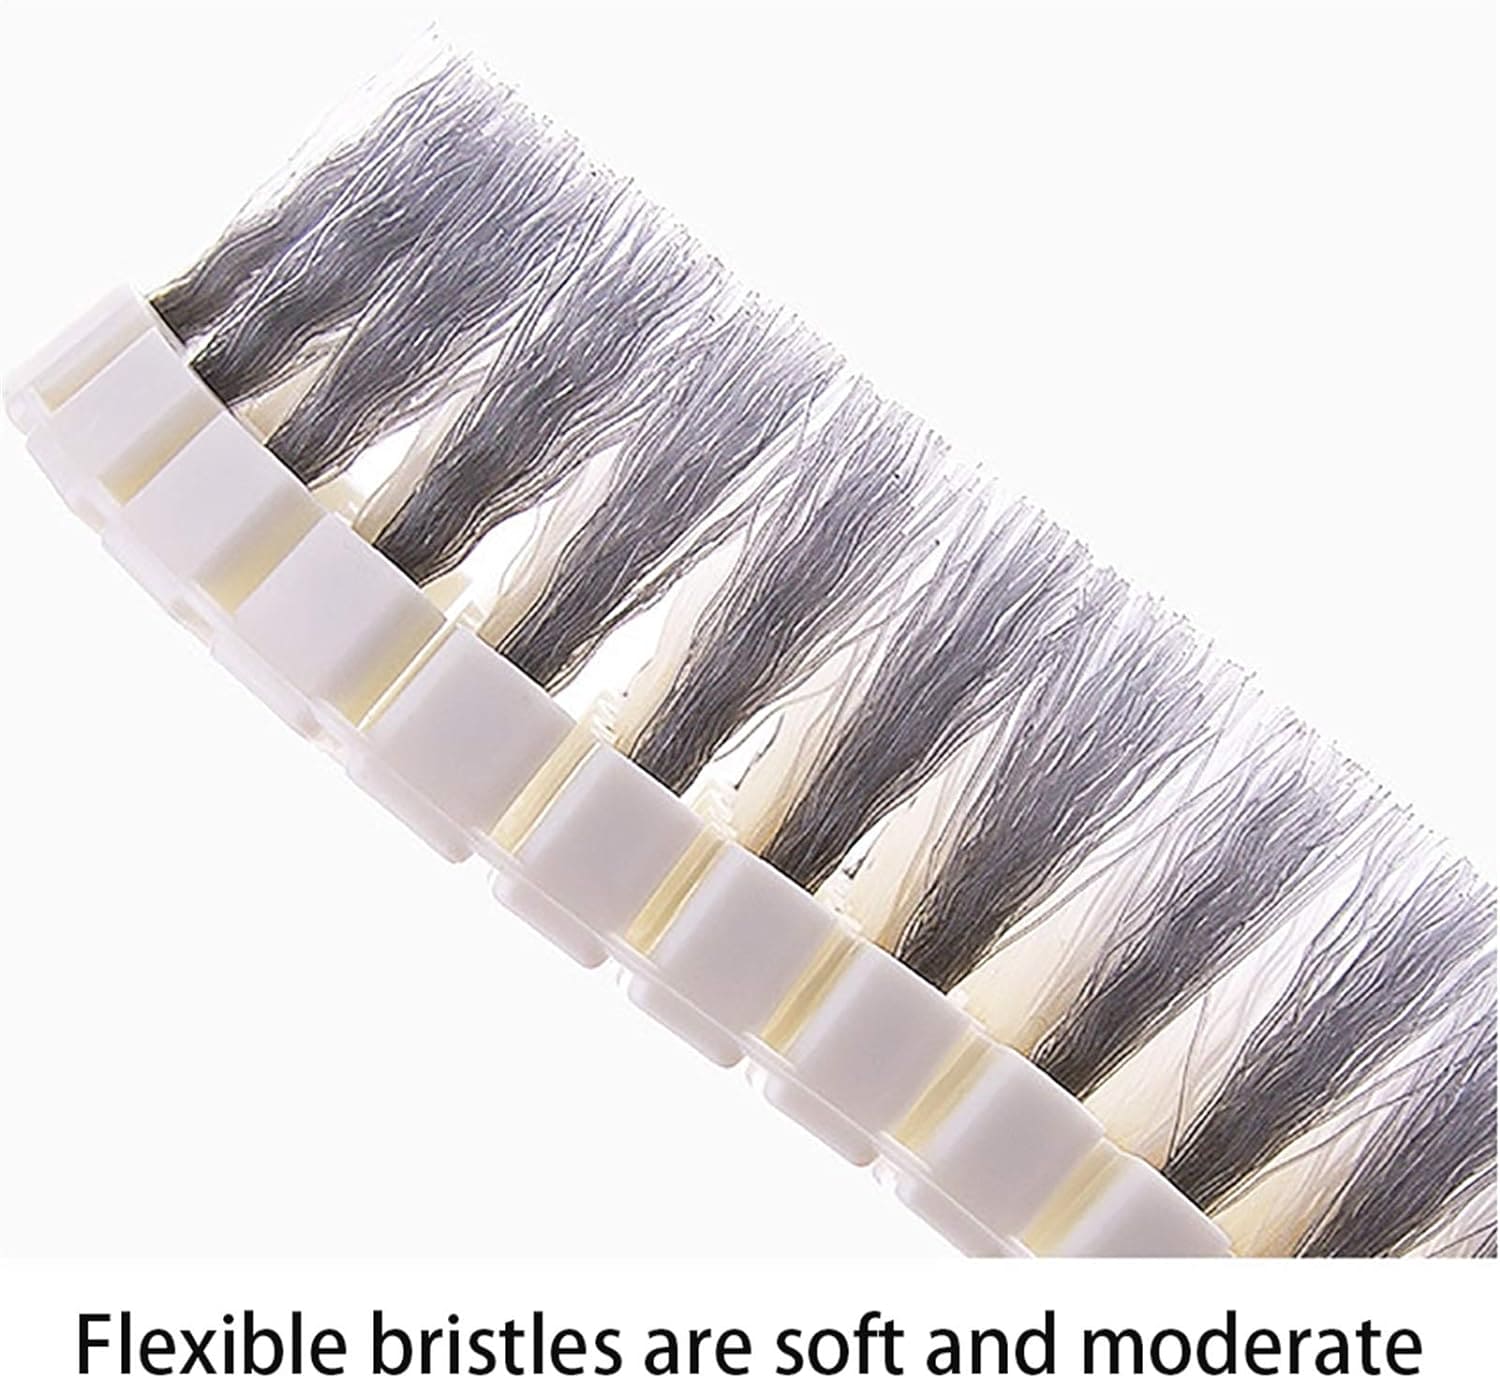 Bendable Sink Cleaning Brush, Multifunctional Flexible Laundry Cleaning Brush, Kitchen Pot Cleaner Brush, Home Kitchen Bathroom Cleaner Tool, Wall Ceramic Tile Floor Cleaning Brush